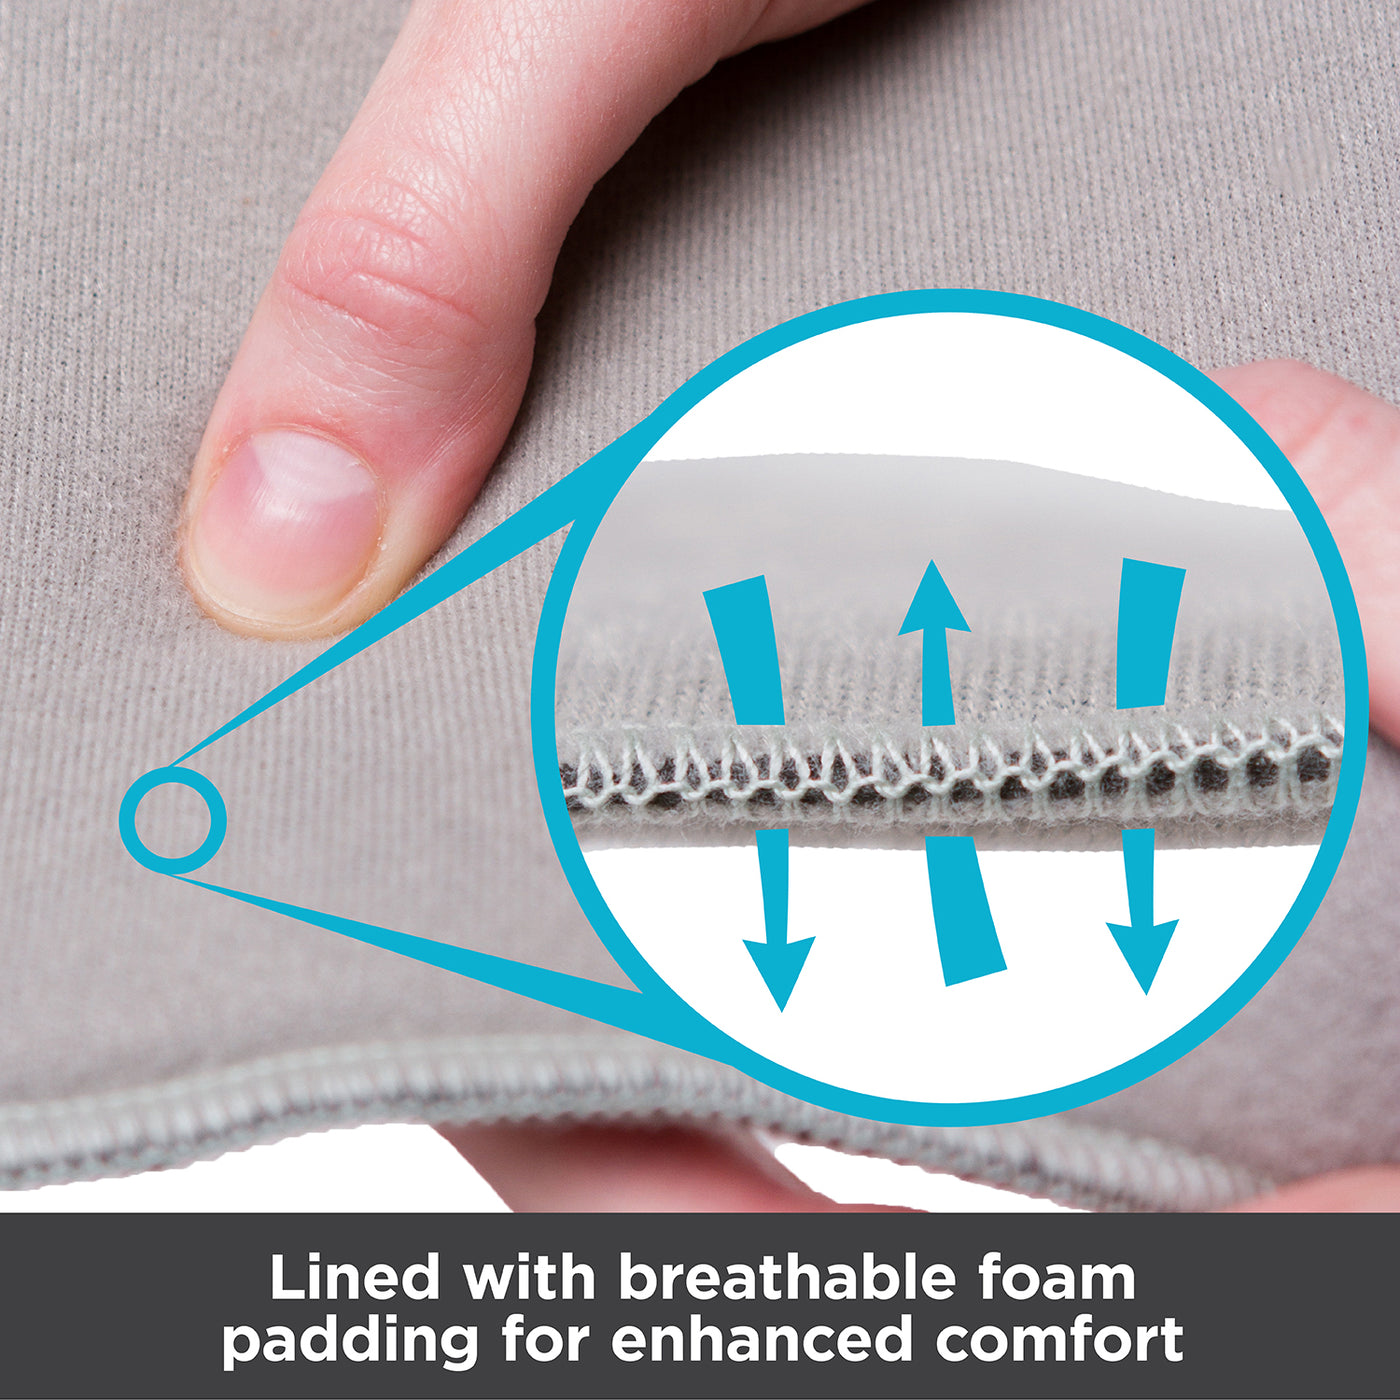 Dorsiwedge night splint is lined with breathable foam padding for enhanced comfort